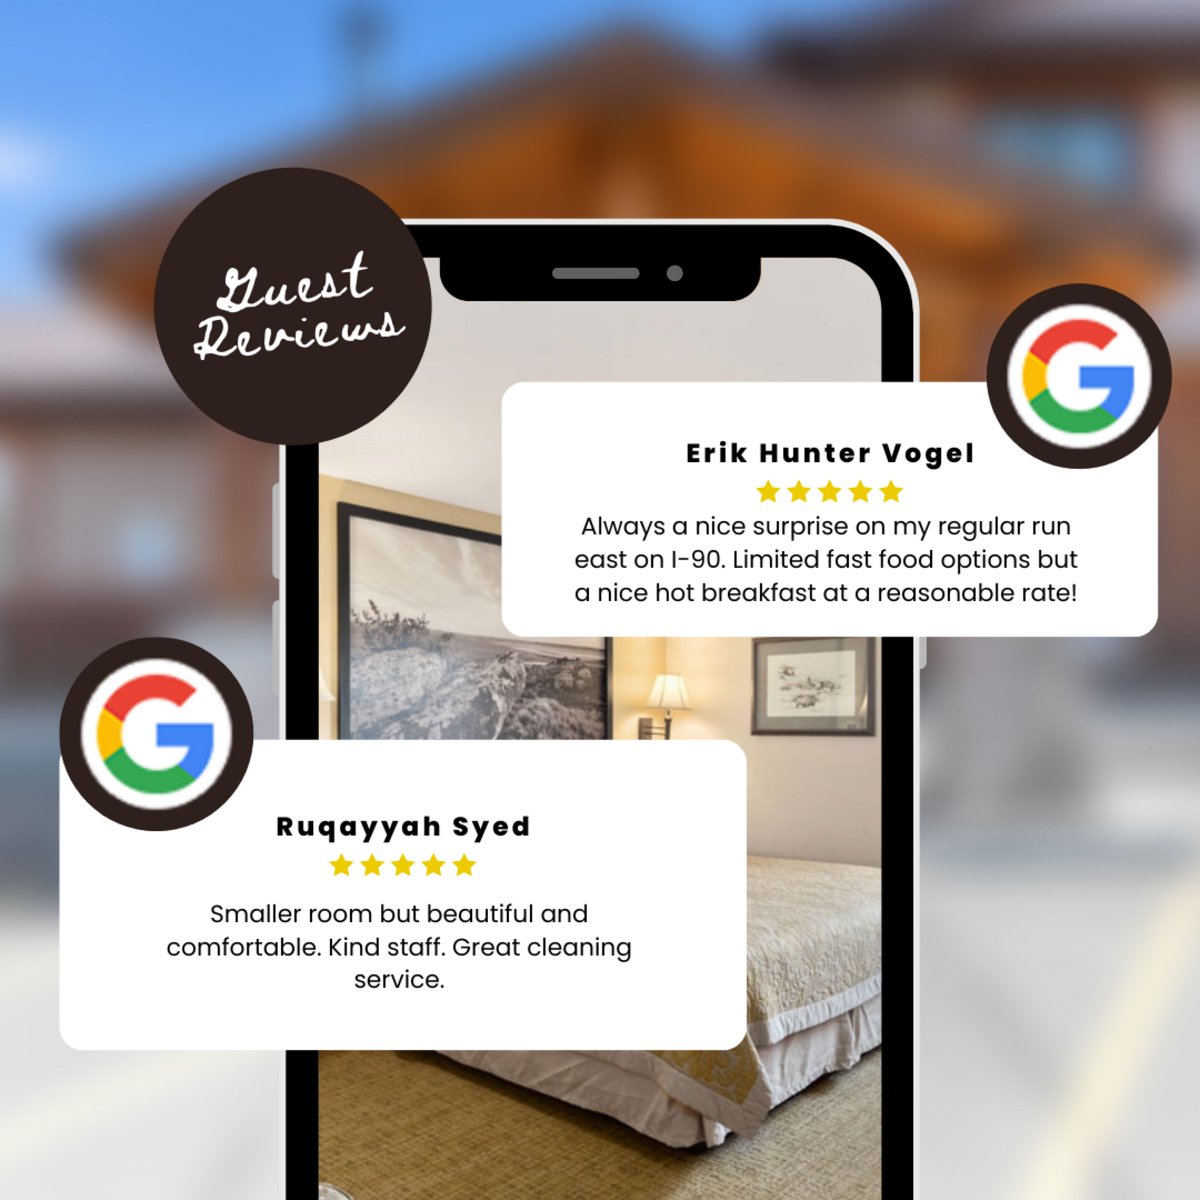 Reading these #reviews sure gives us the warm and fuzzies. 😊 It's always nice to hear that our guests can count on us as a reliable place to stop for great service, clean rooms, and a #hotbreakfast when they're in #Hardin. Stop by and see us yourself! We'll save a room for you.